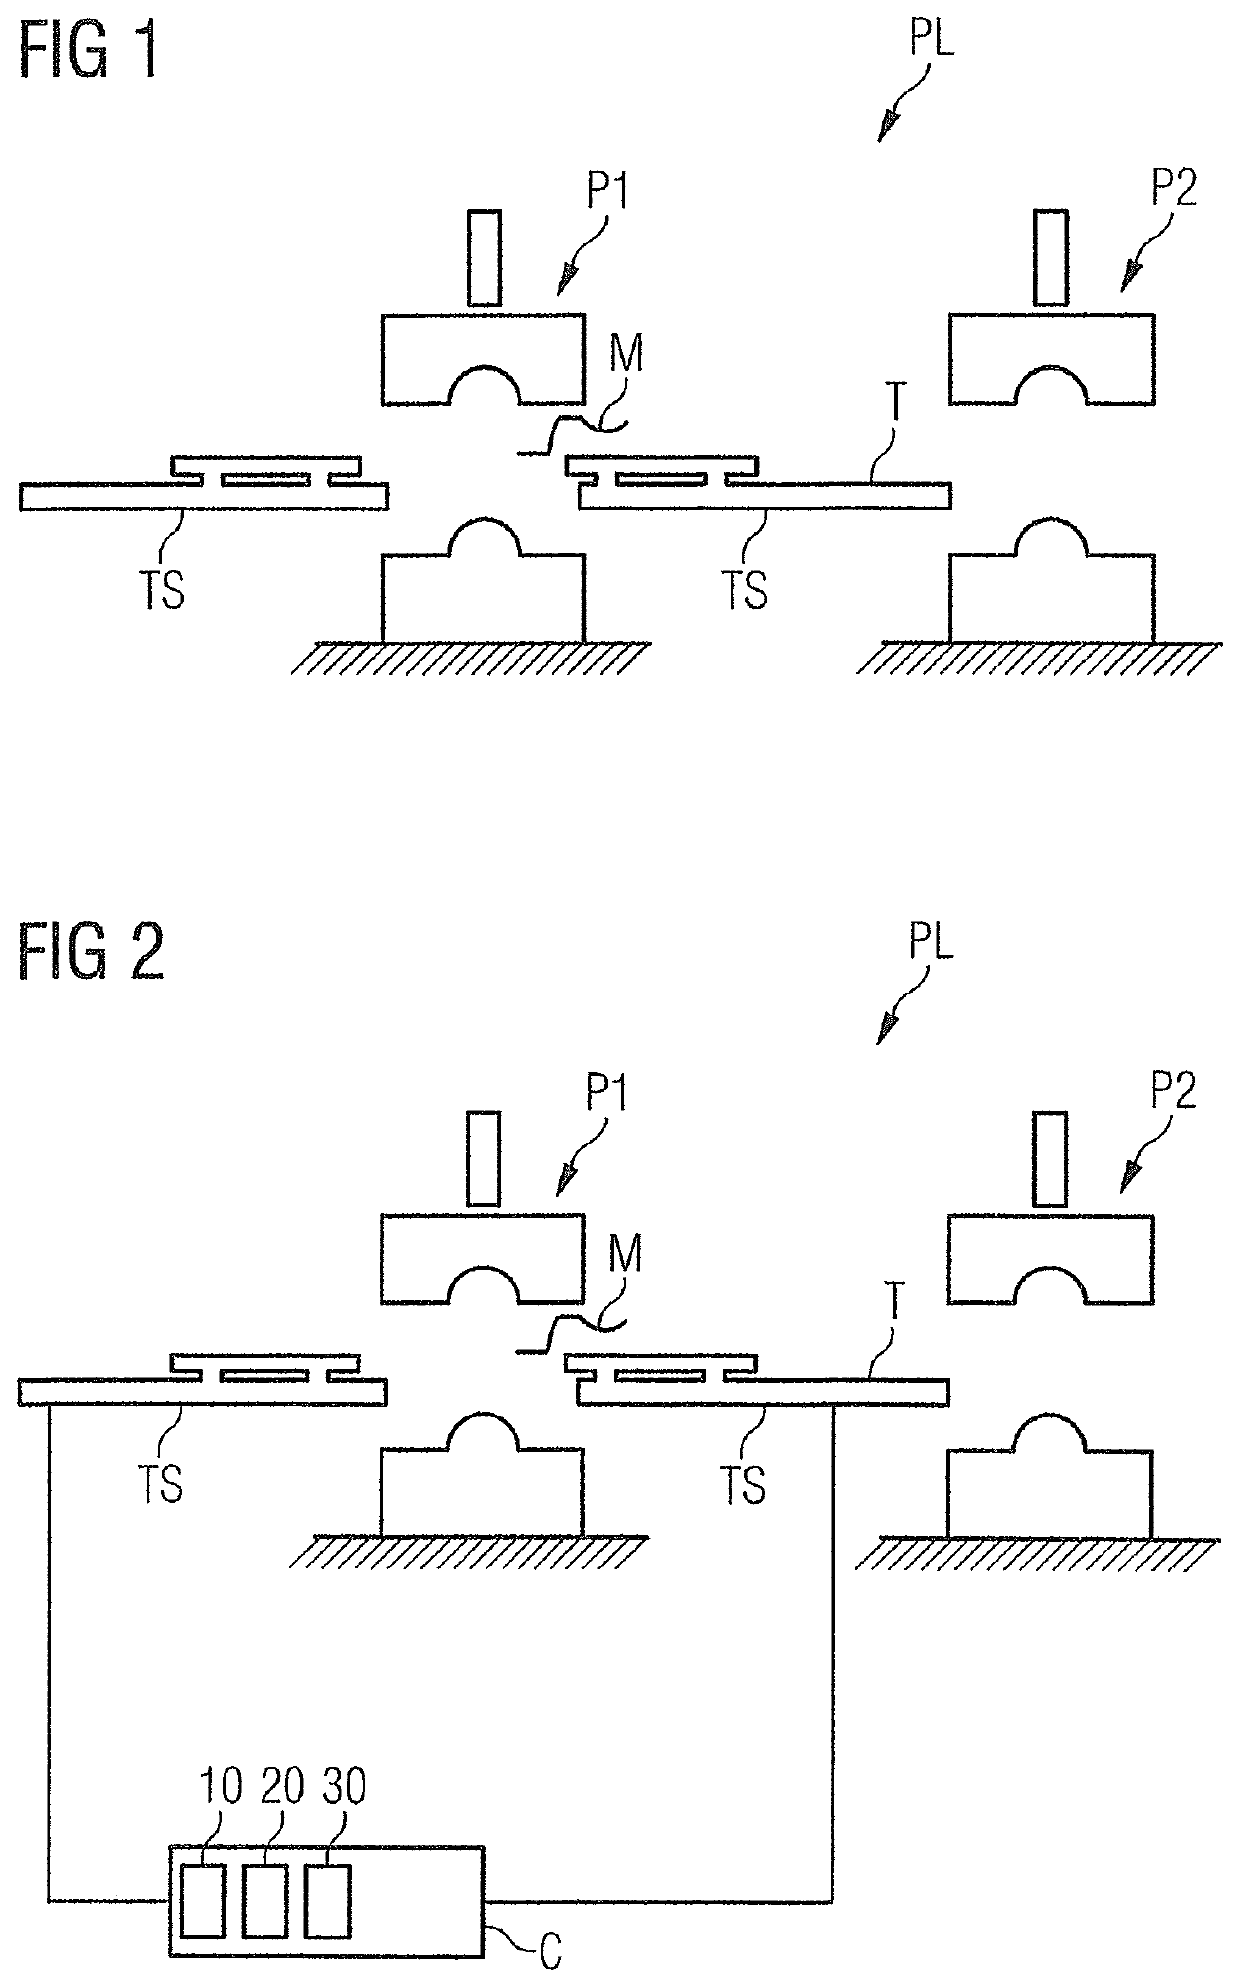 Motion Planning for a Conveyor System of a Servo Press Installation